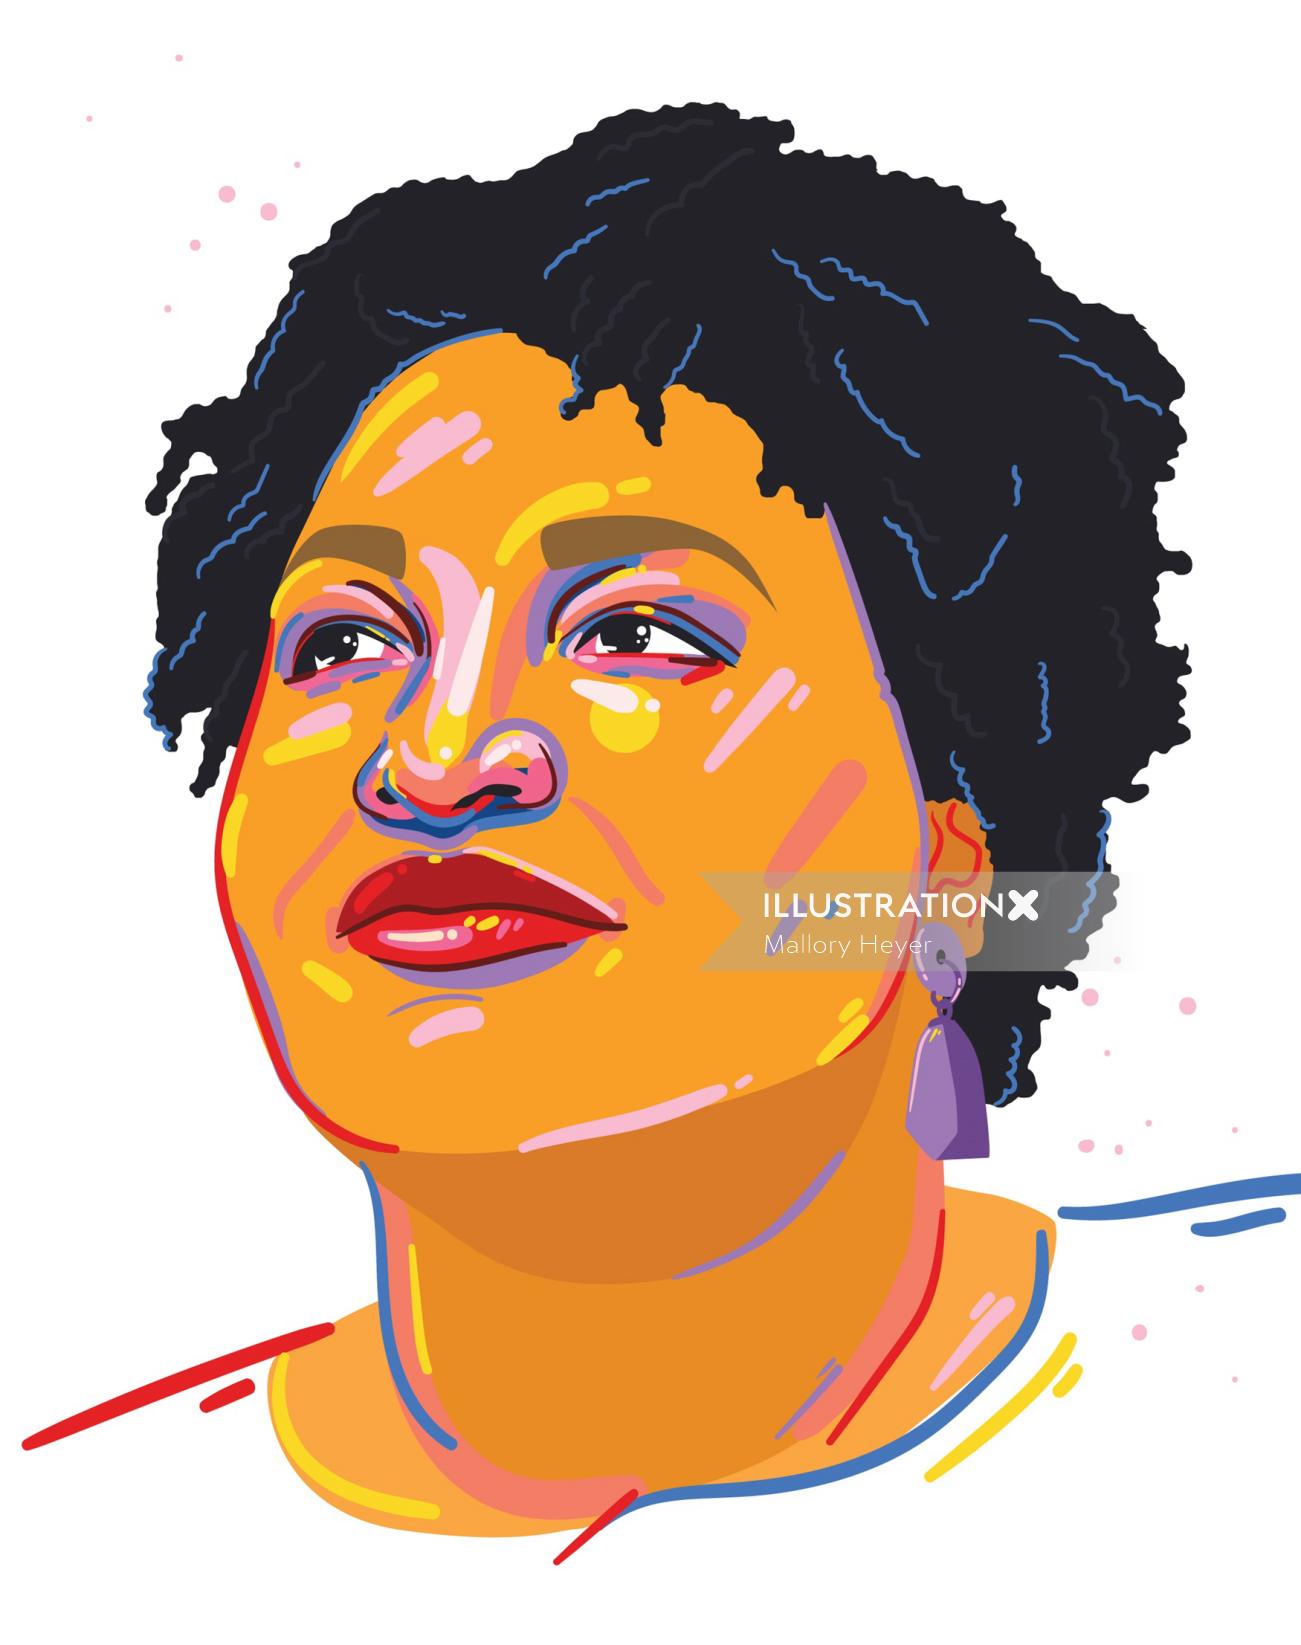 Portraiture of Stacey Abrams is an American politician